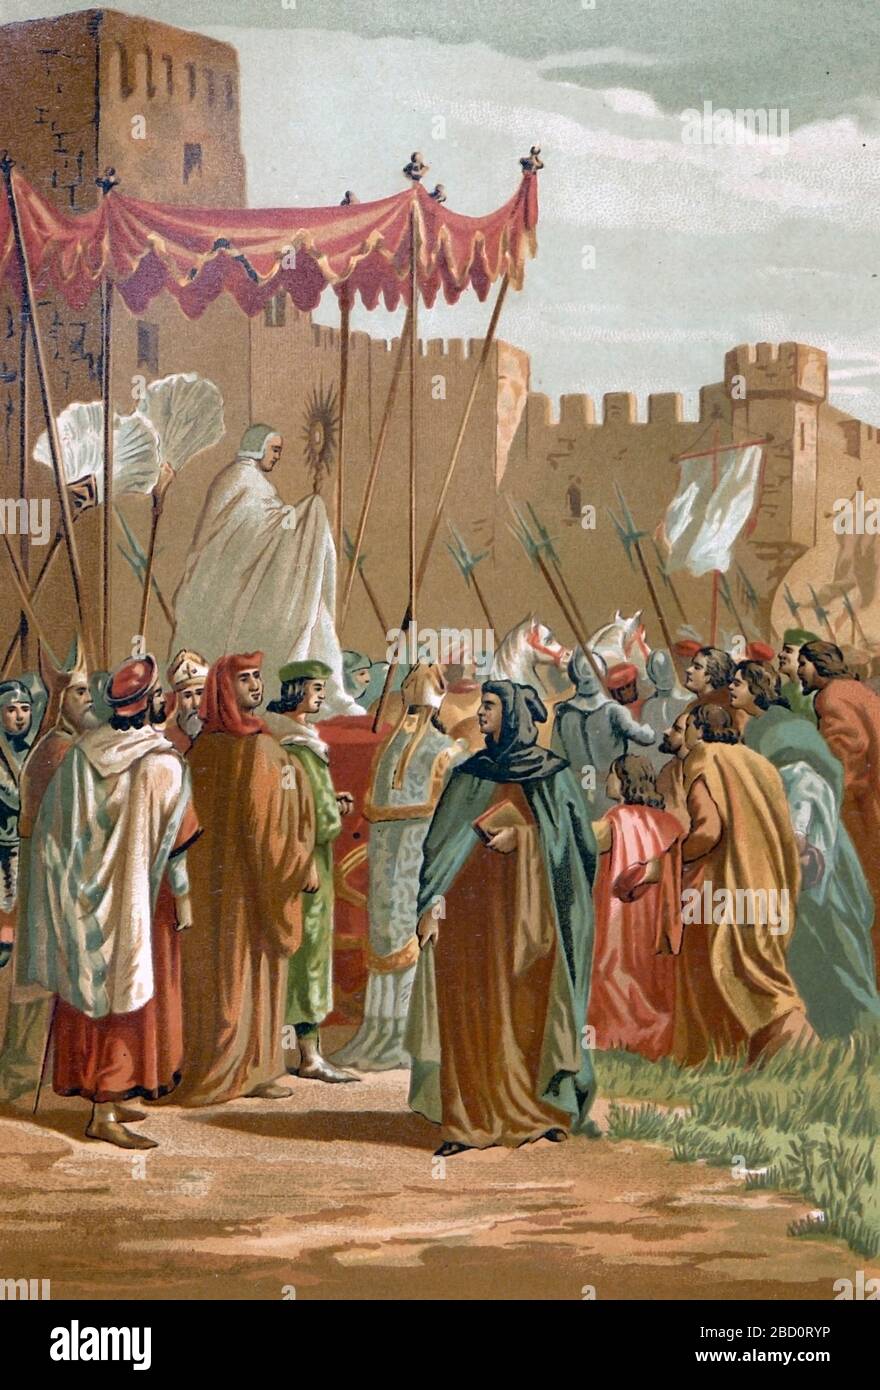 Encounter of Petrarch and Guy de Chauliac outside the castle of the Popes in Avignon. Francesco Petrarca (July 20, 1304 - July 19, 1374), commonly anglicized as Petrarch, was an Italian scholar and poet in Renaissance Italy, and one of the earliest humanists. He is often called the 'Father of Humanism'. His sonnets were admired and imitated throughout Europe during the Renaissance and became a model for lyrical poetry. He traveled widely in Europe and served as an ambassador and has been called 'the first tourist' because he traveled just for pleasure. Guy de Chauliac (1300 - July 25, 1368), w Stock Photo